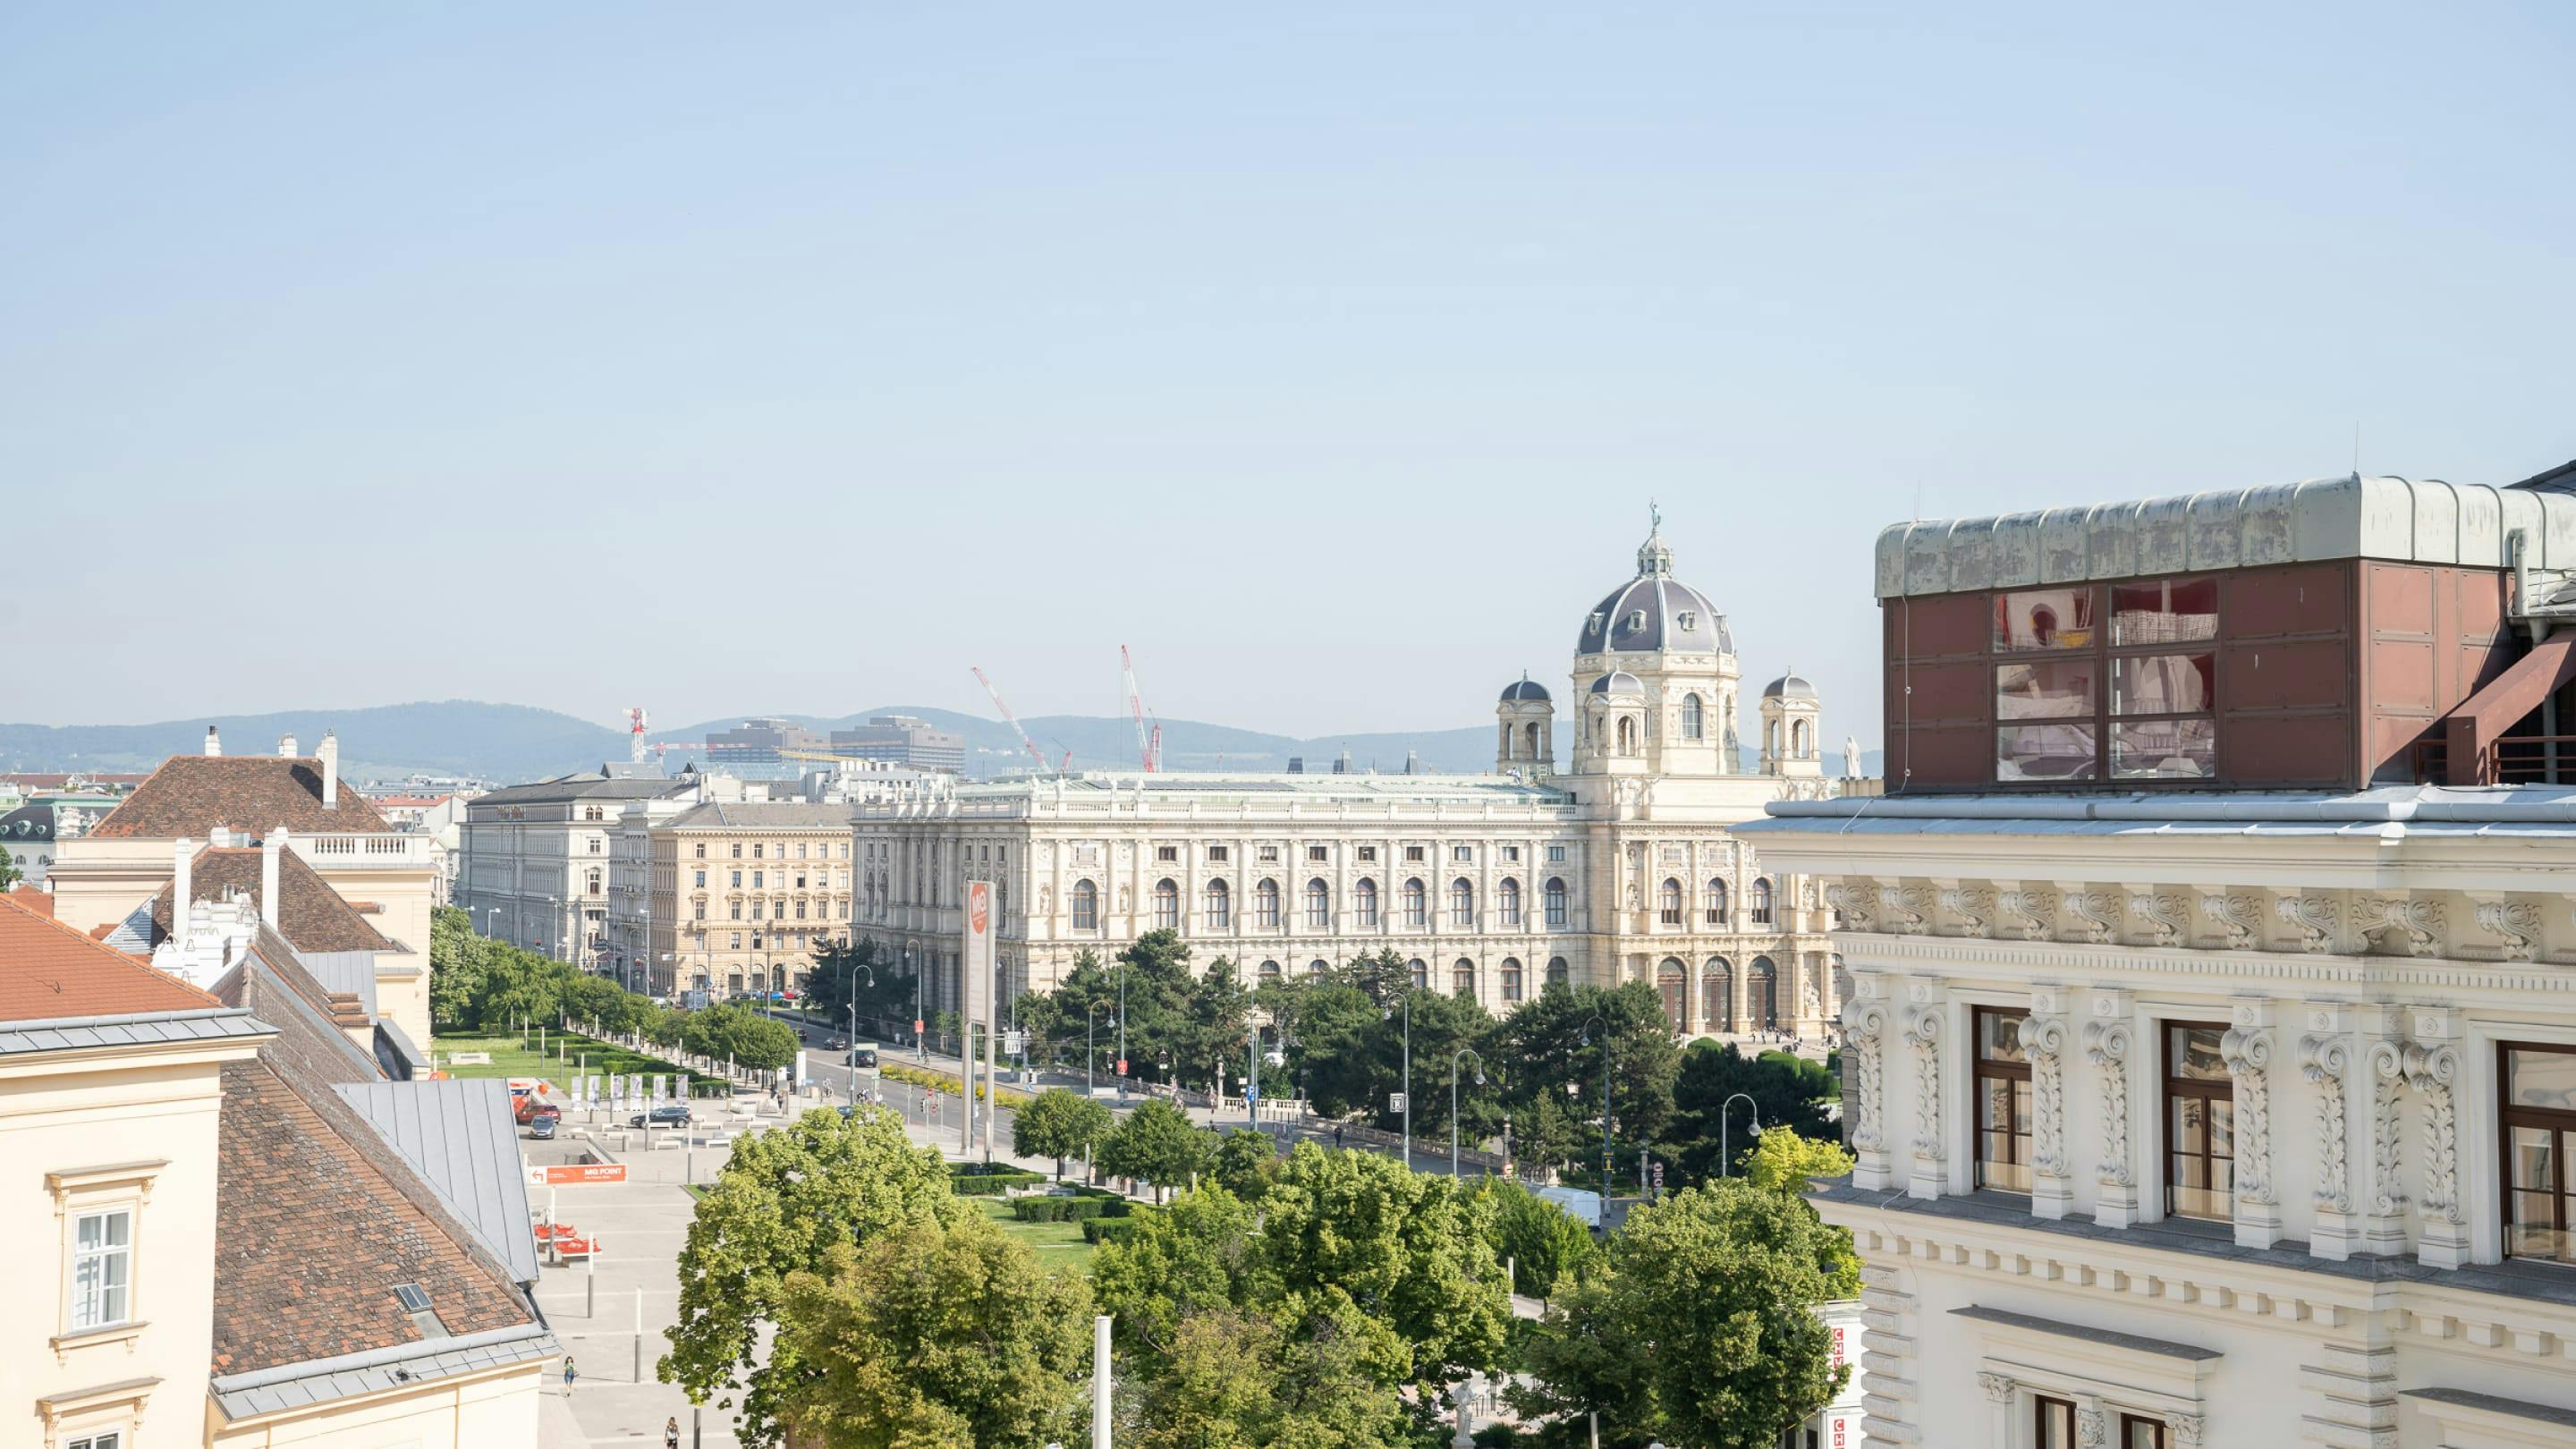 View of the Kunsthistorisches Museum Vienna near the Functn office.